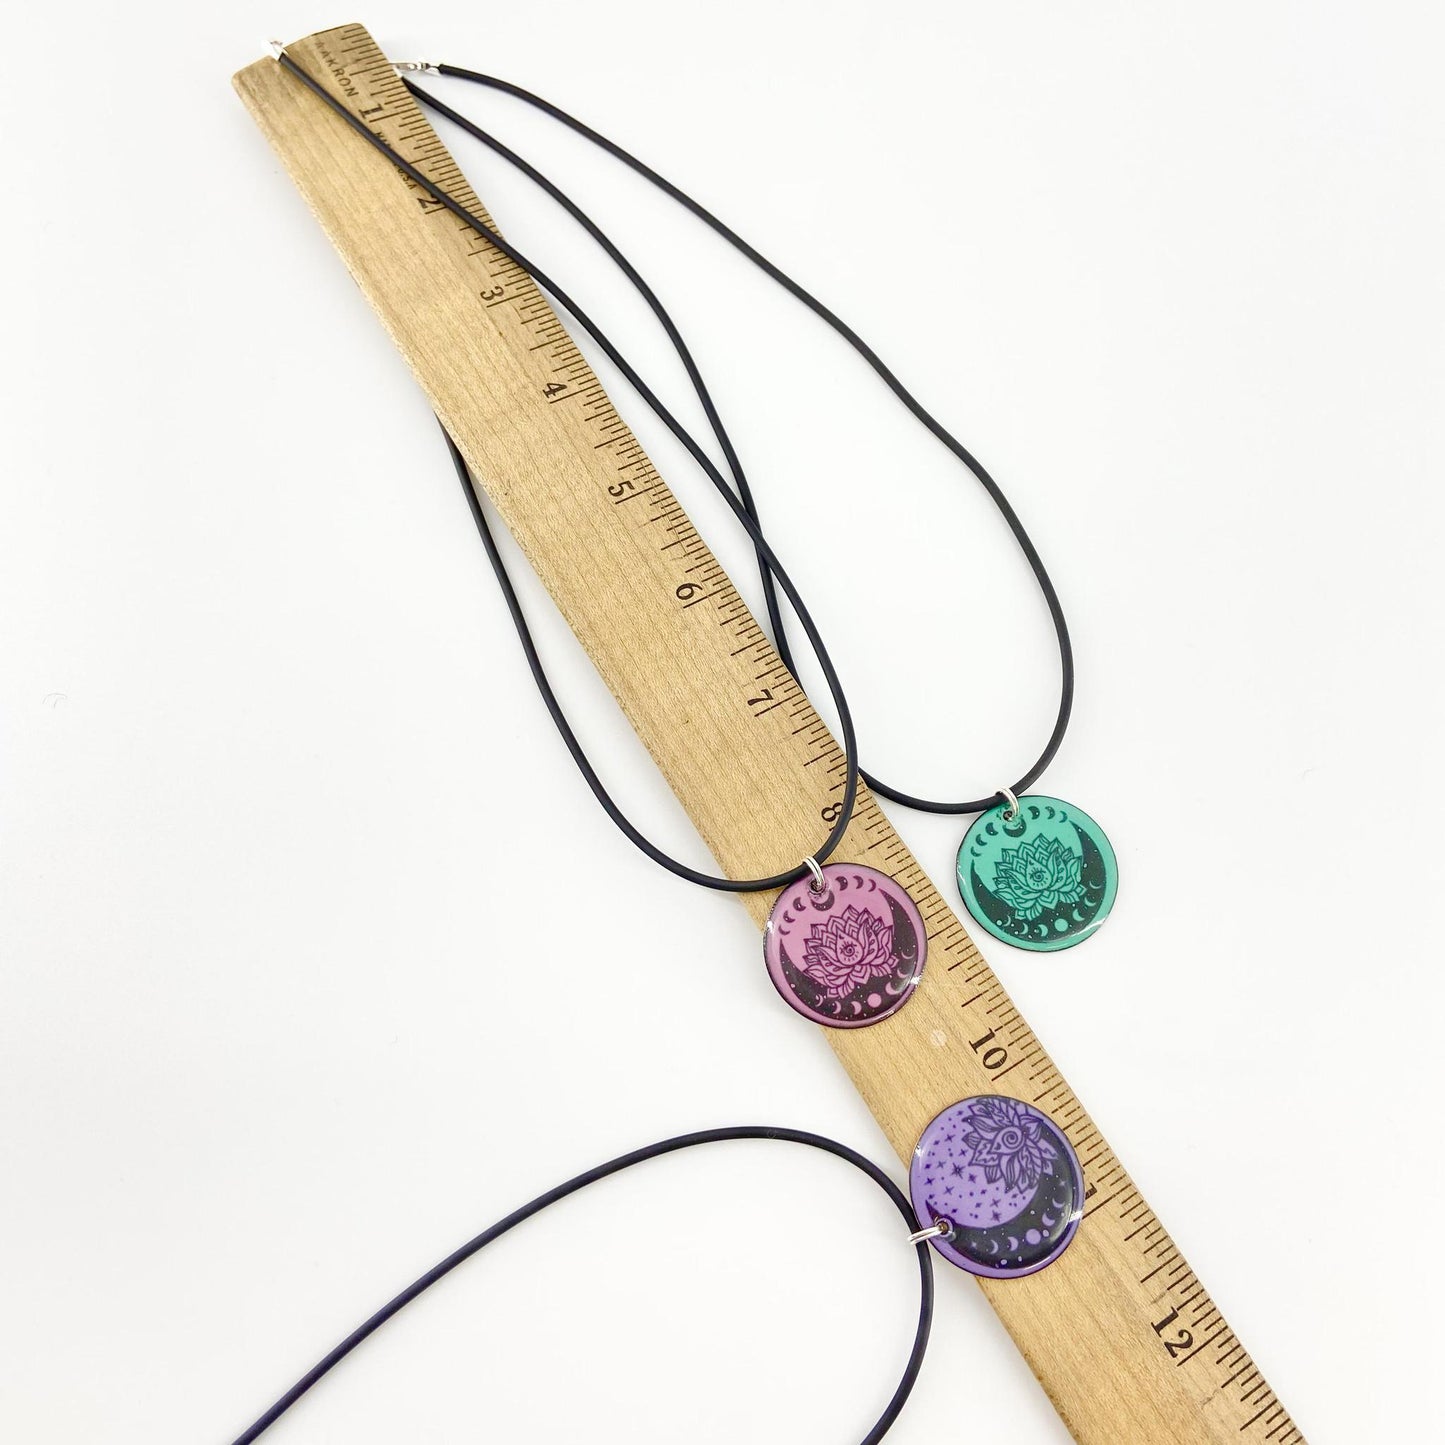 Necklace - Lotus and Moon Phases on Purple - Enamel on Copper